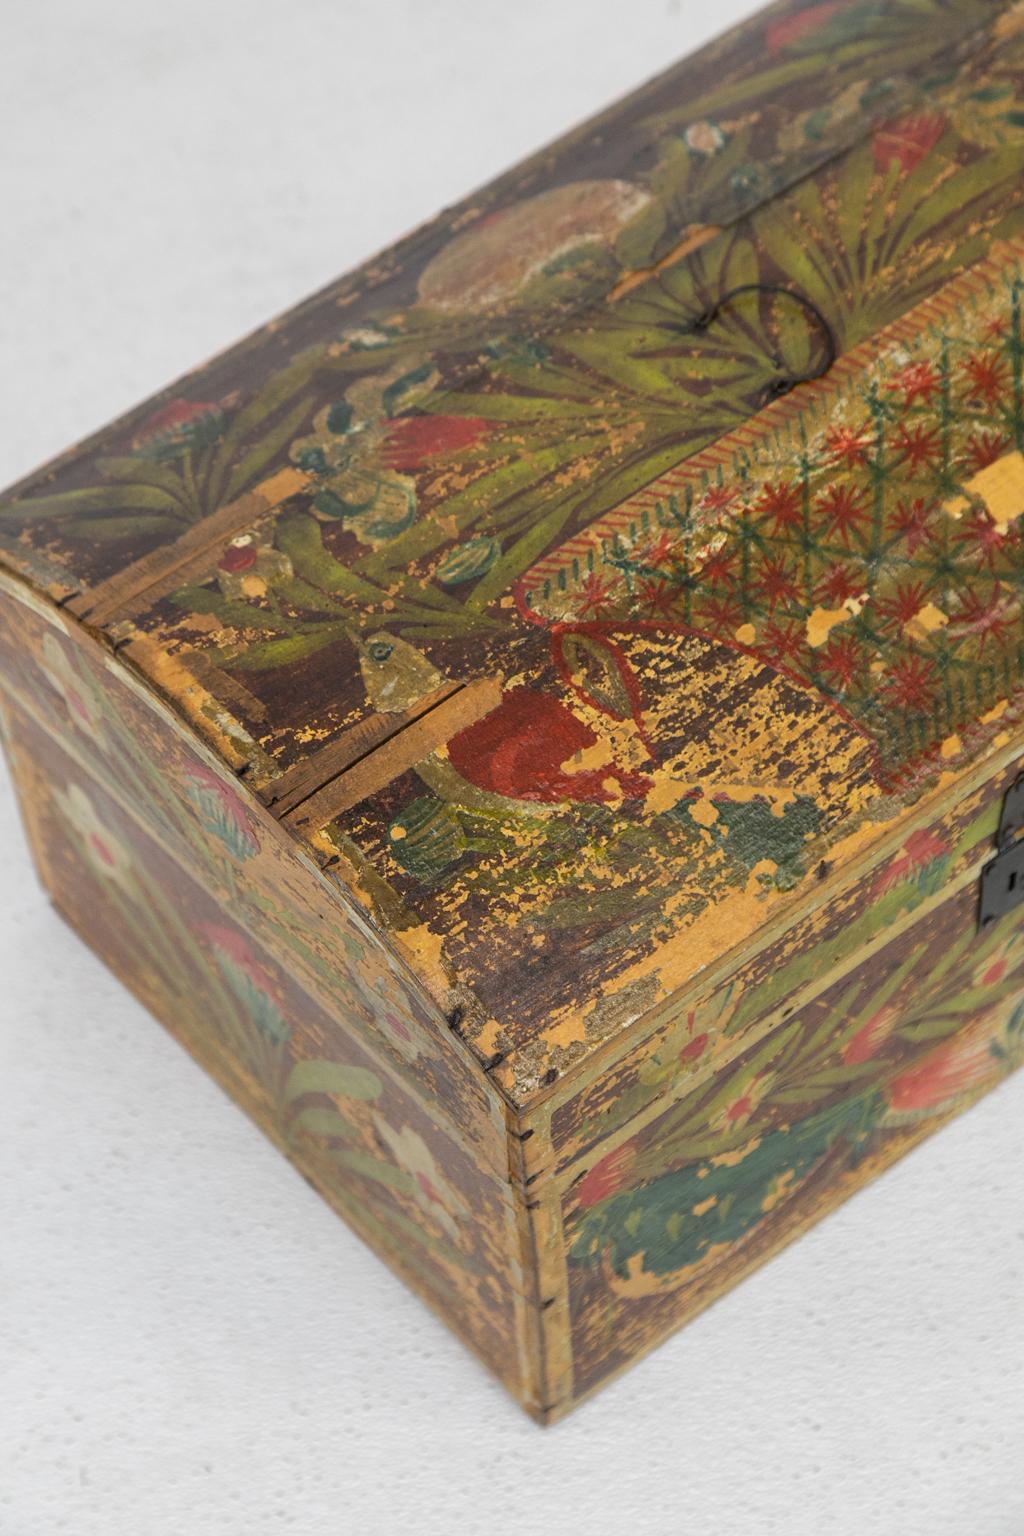 Painted Scandinavian bride's box is painted with floral and draped linen designs.